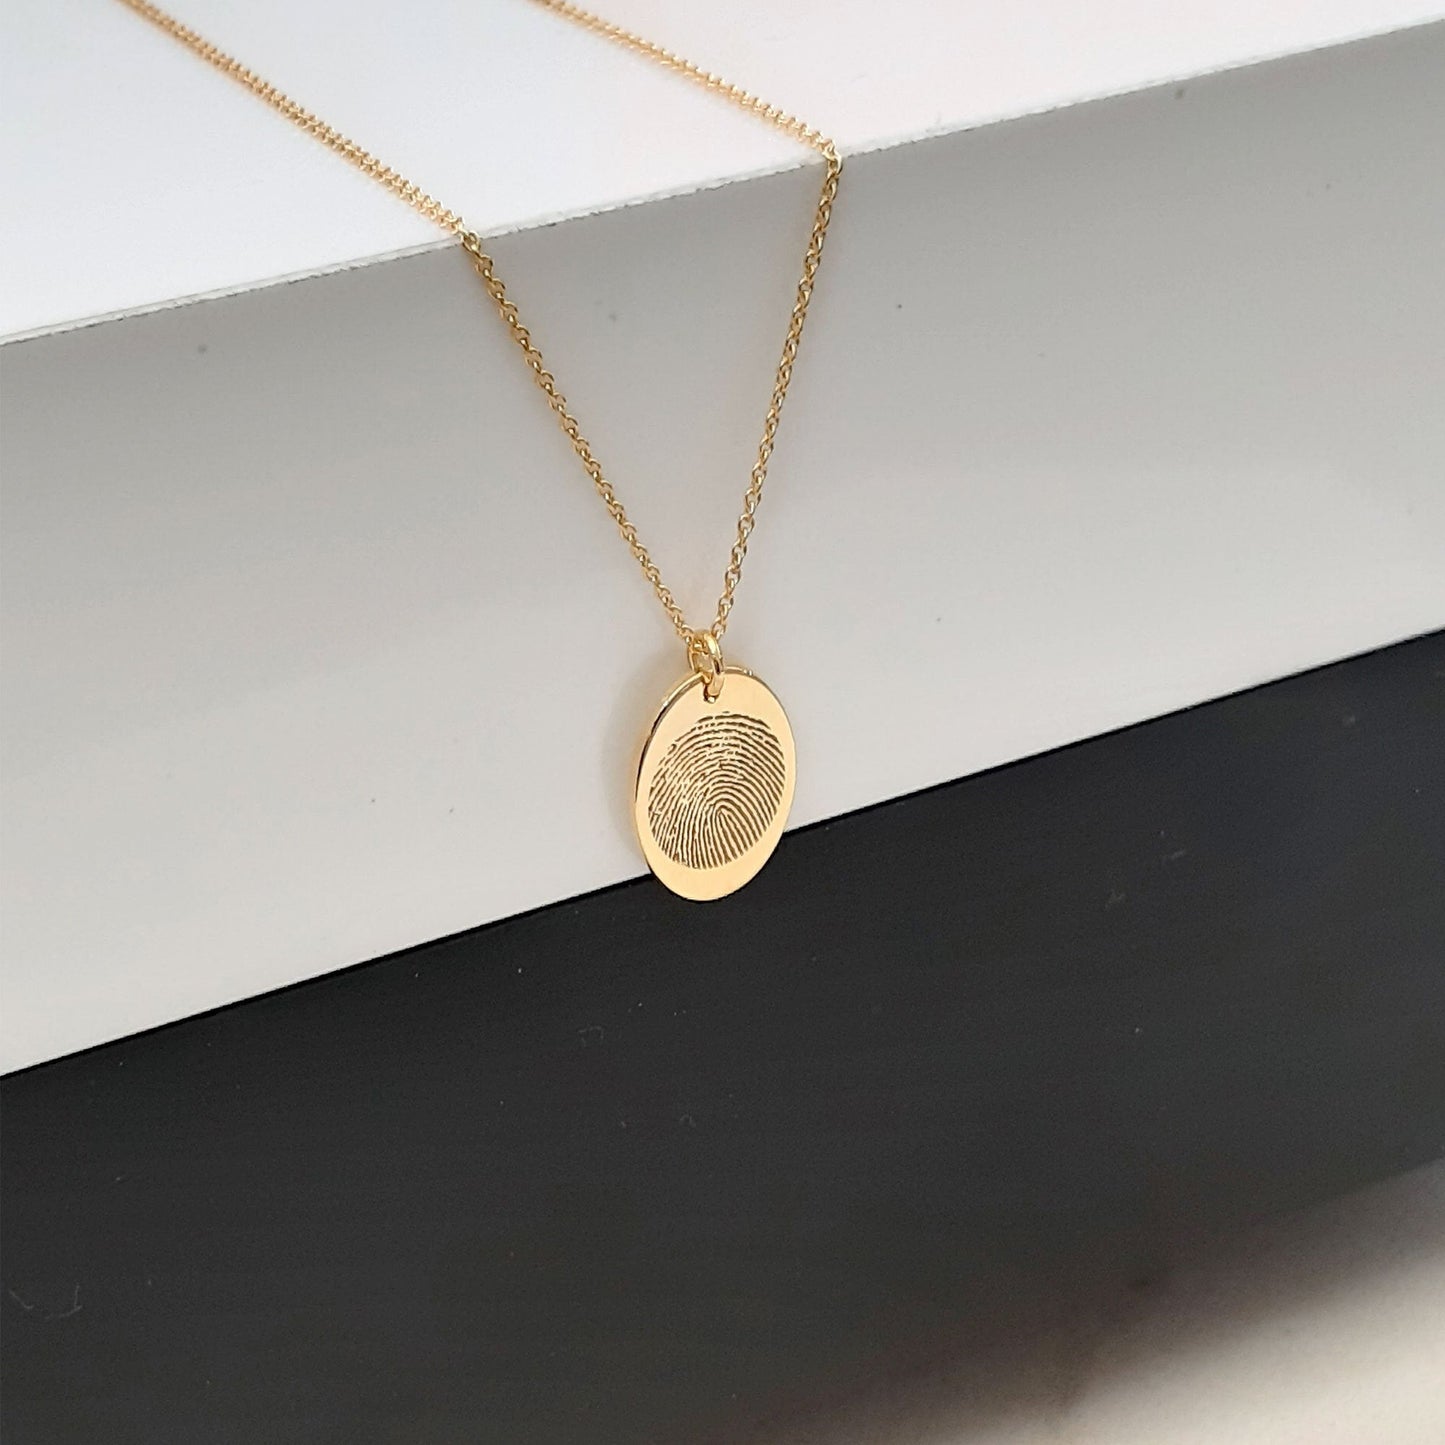 14k Yellow gold Fingerprint Necklace - Unique gold Sympathy Gift - Delicate Personalized Fingerprint Necklace For Her - layered necklace